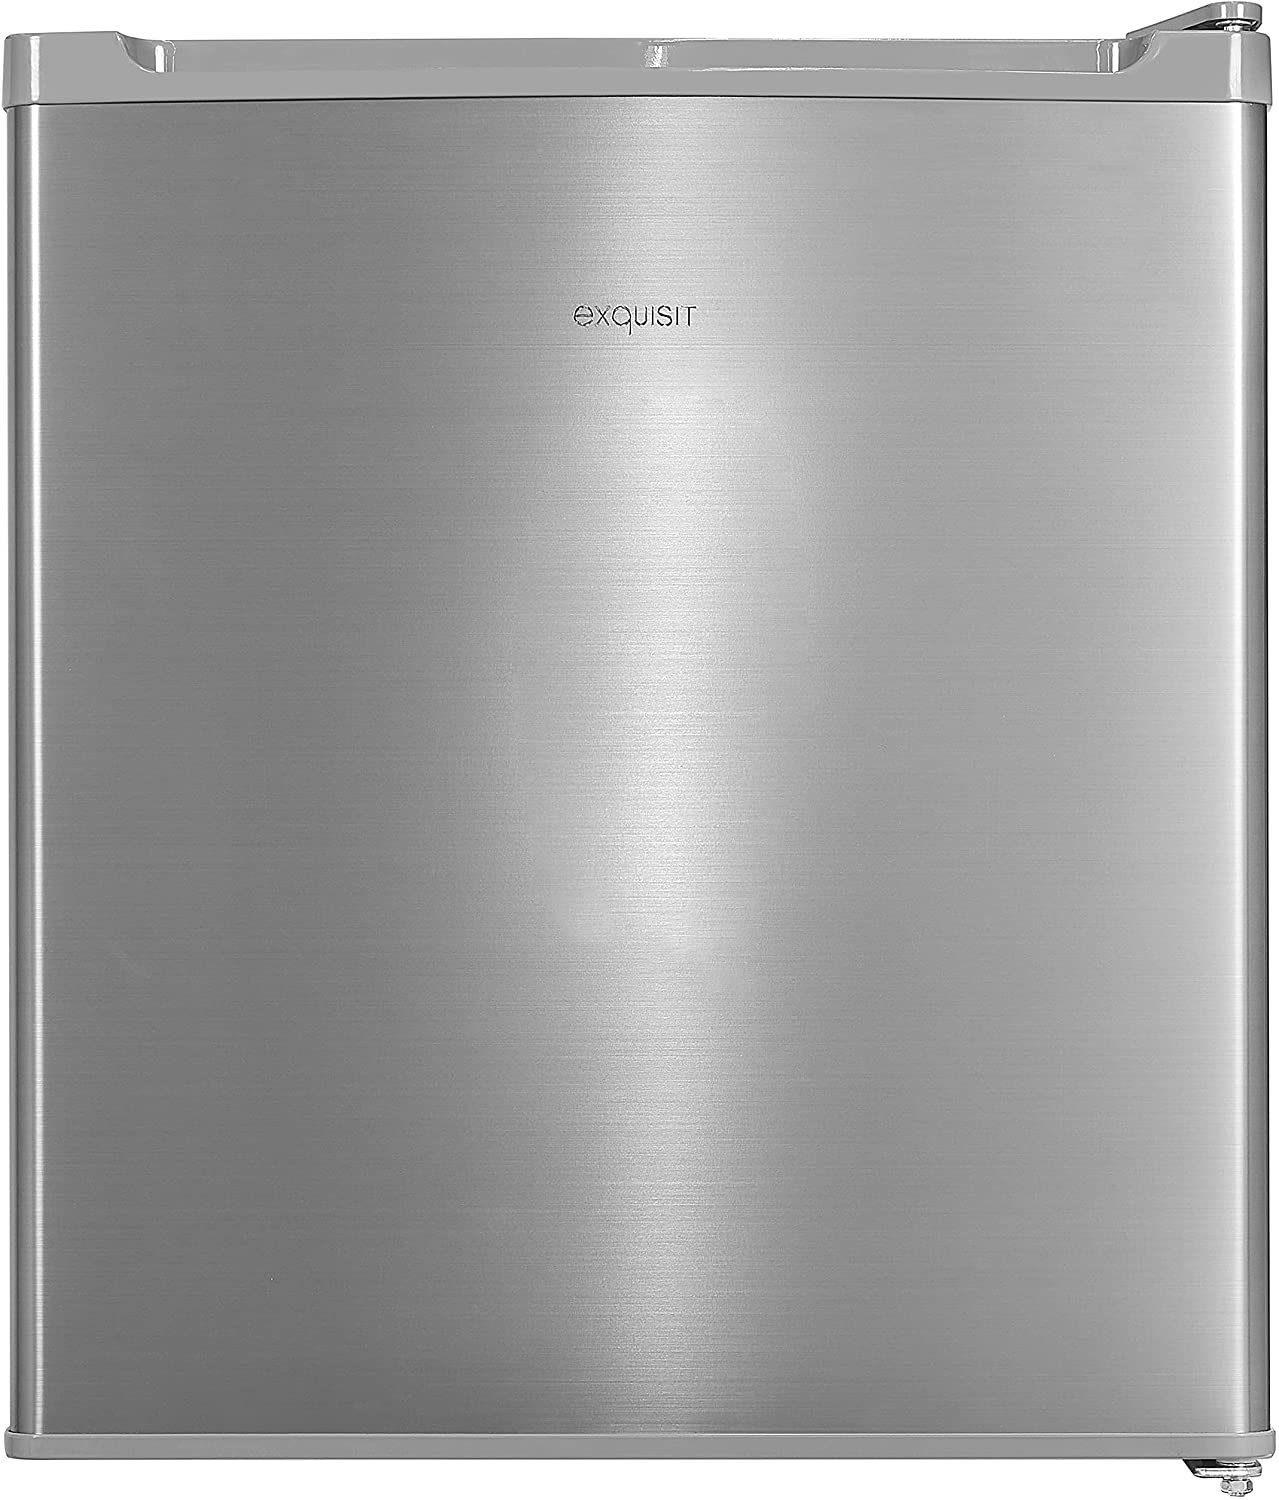 Deals € Exquisit Black TOP inox-look 2023) (November ab GB05-040E Angebote Test Friday 155,90